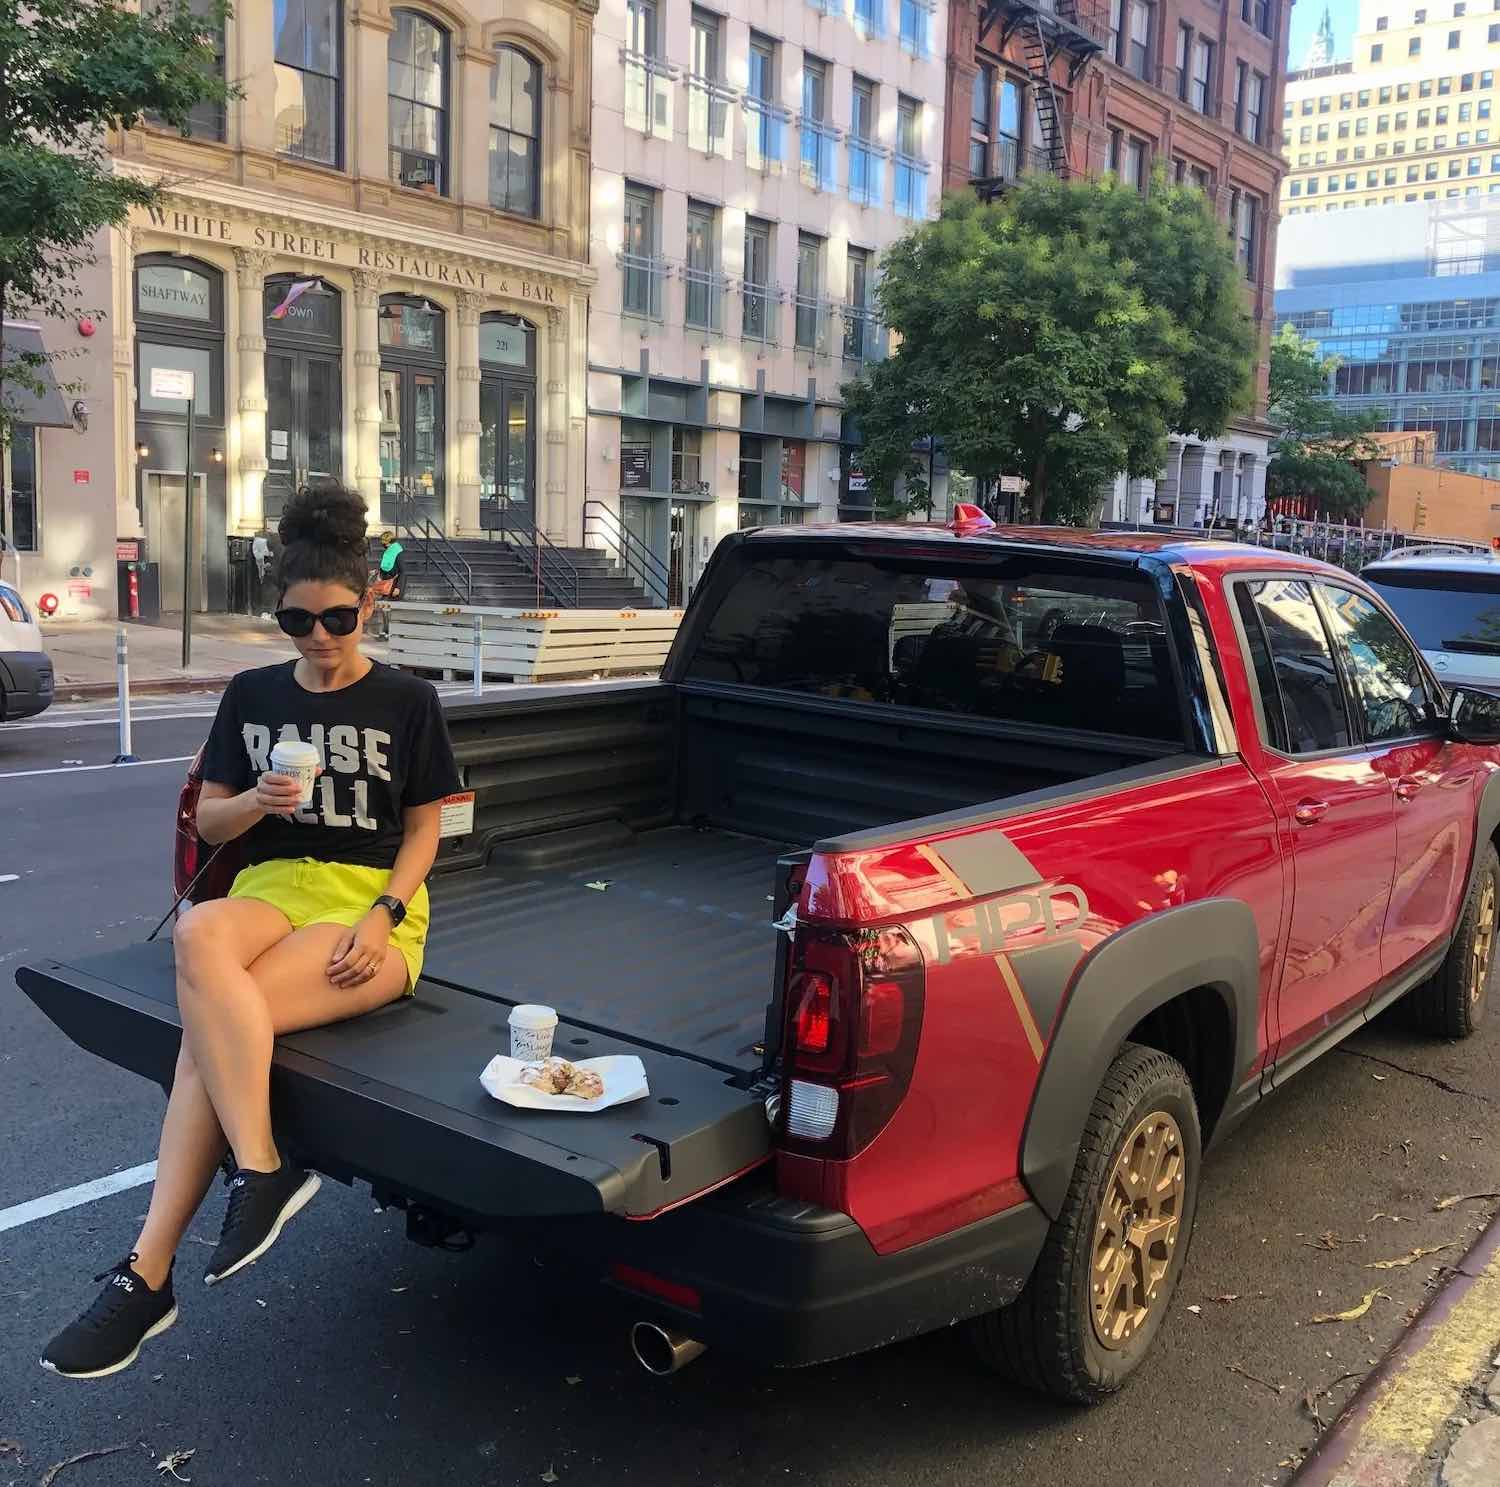 Woman sits on the tailgate of a used 2021 Honda Ridgeline compact pickup truck, buildings visible in the background.